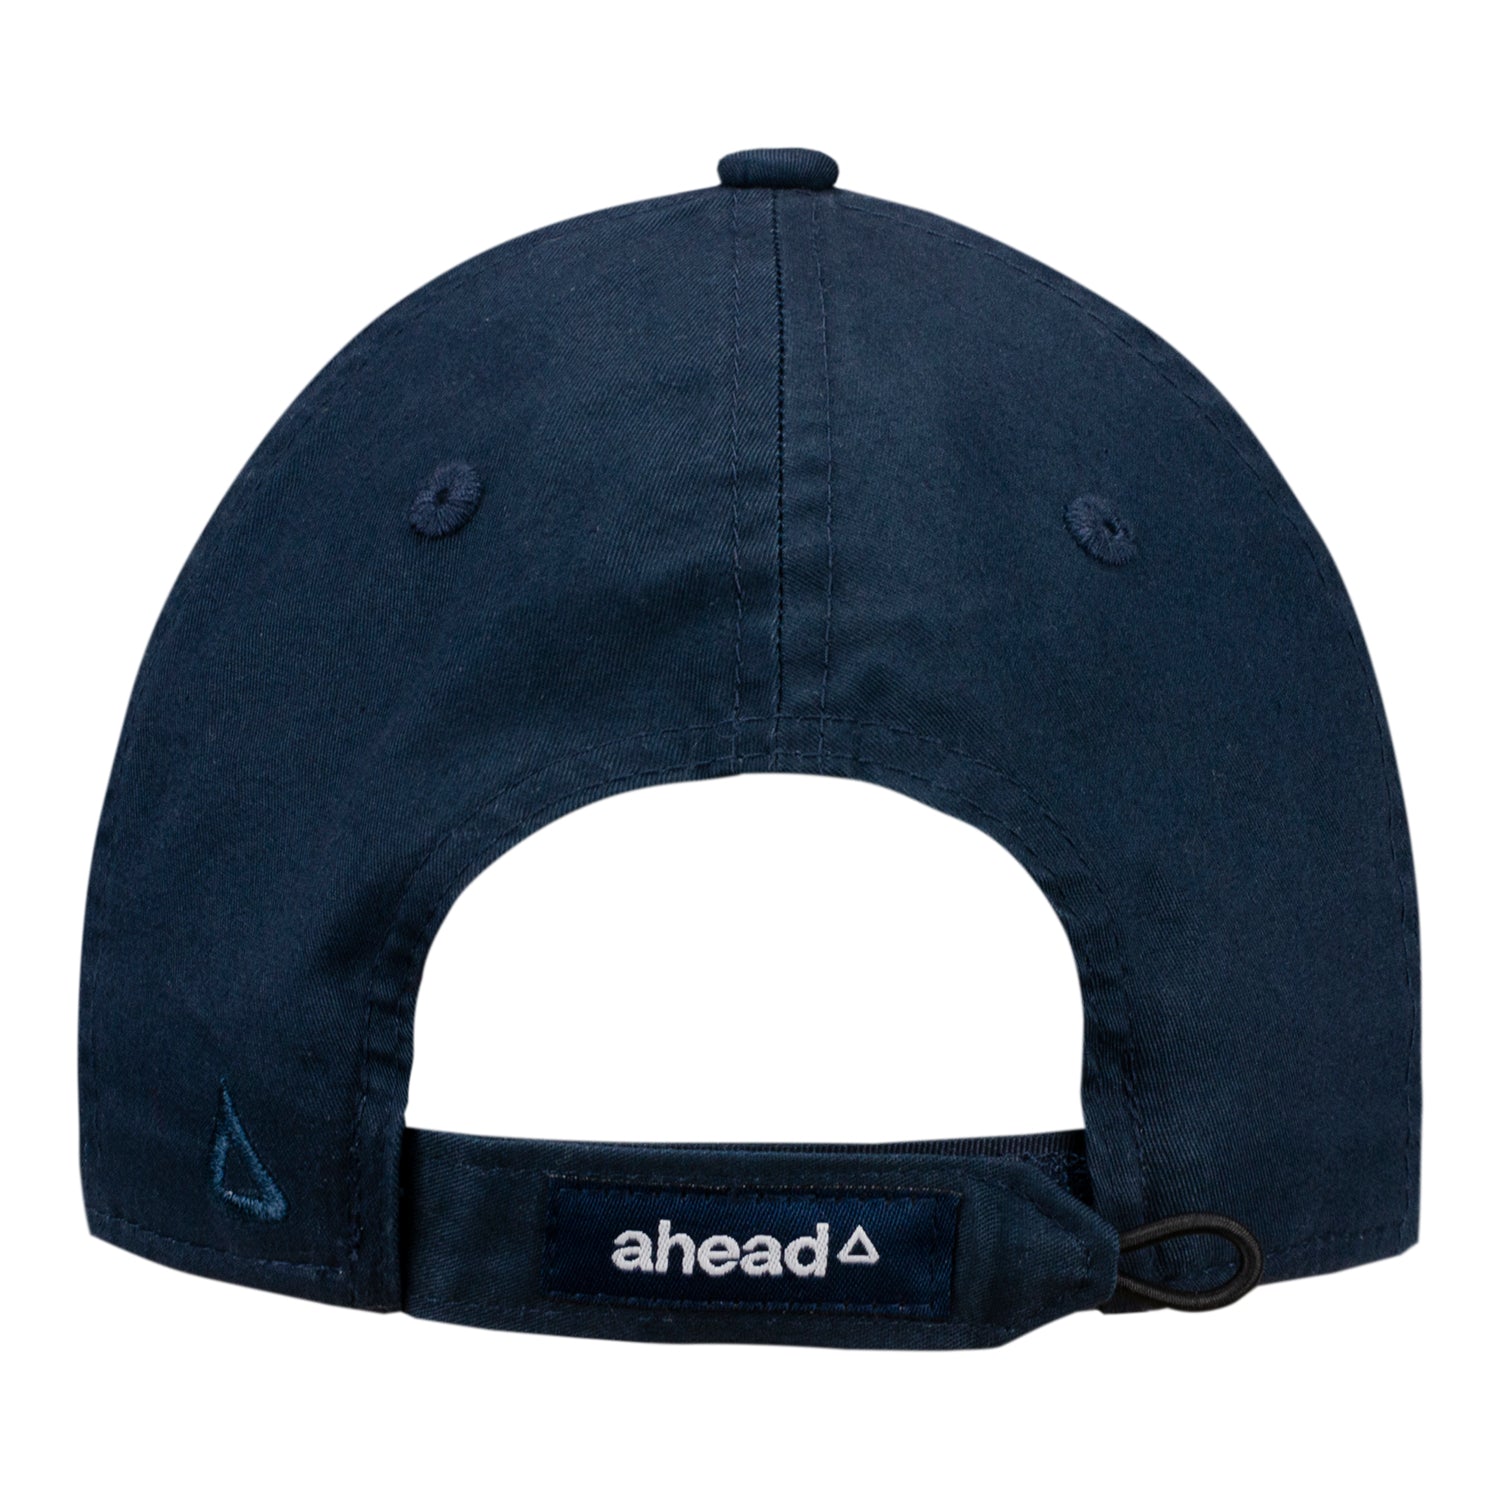 Ahead PGA HOPE Unisex Cotton Unstructured Hat in Navy - Back View